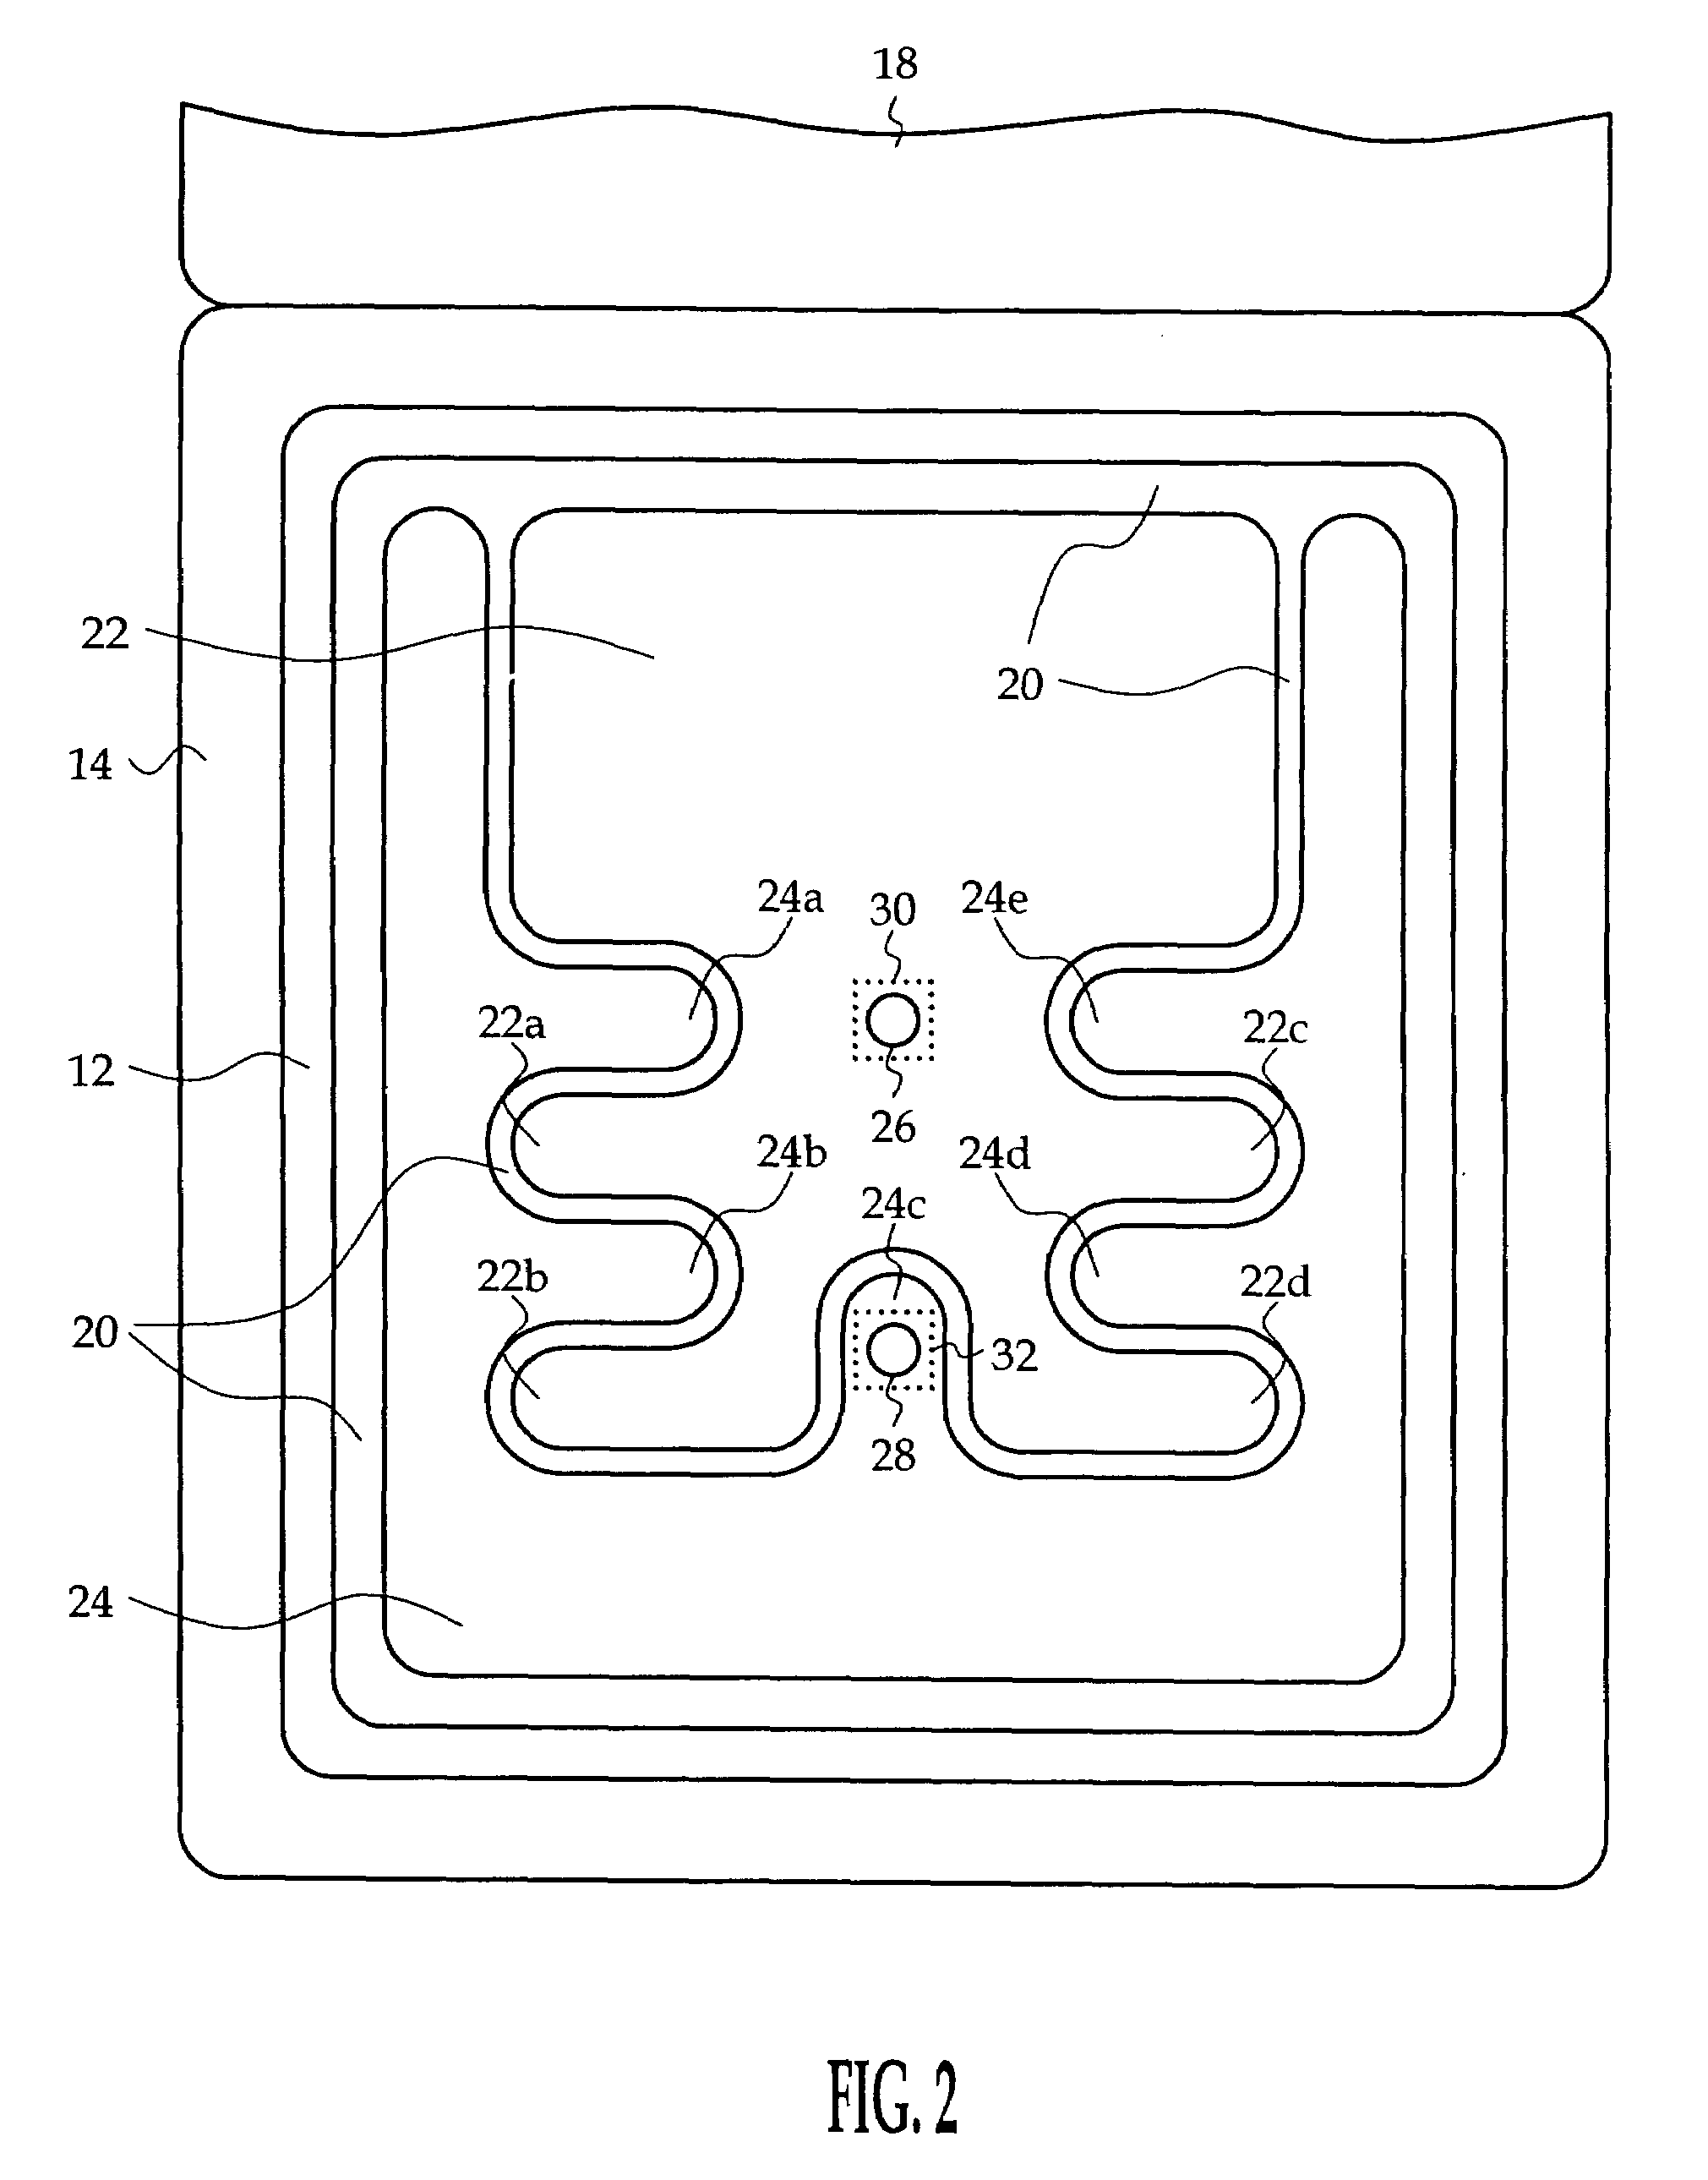 Dual interdigitated chamber seat bladder for occupant position and weight estimation